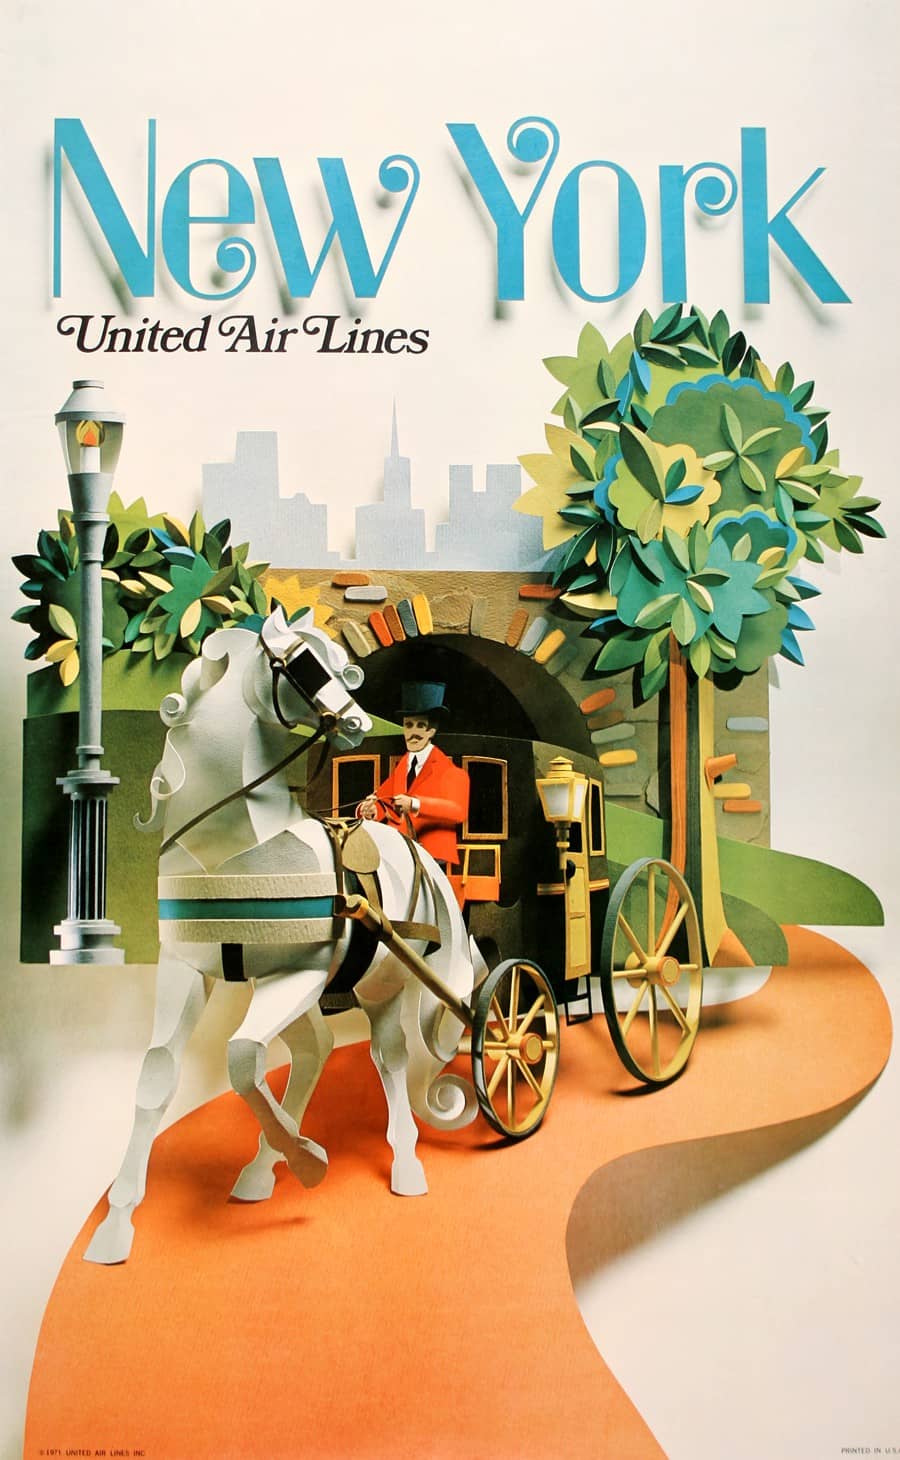 United Air Lines New York Poster - Central Park Carriage 1971